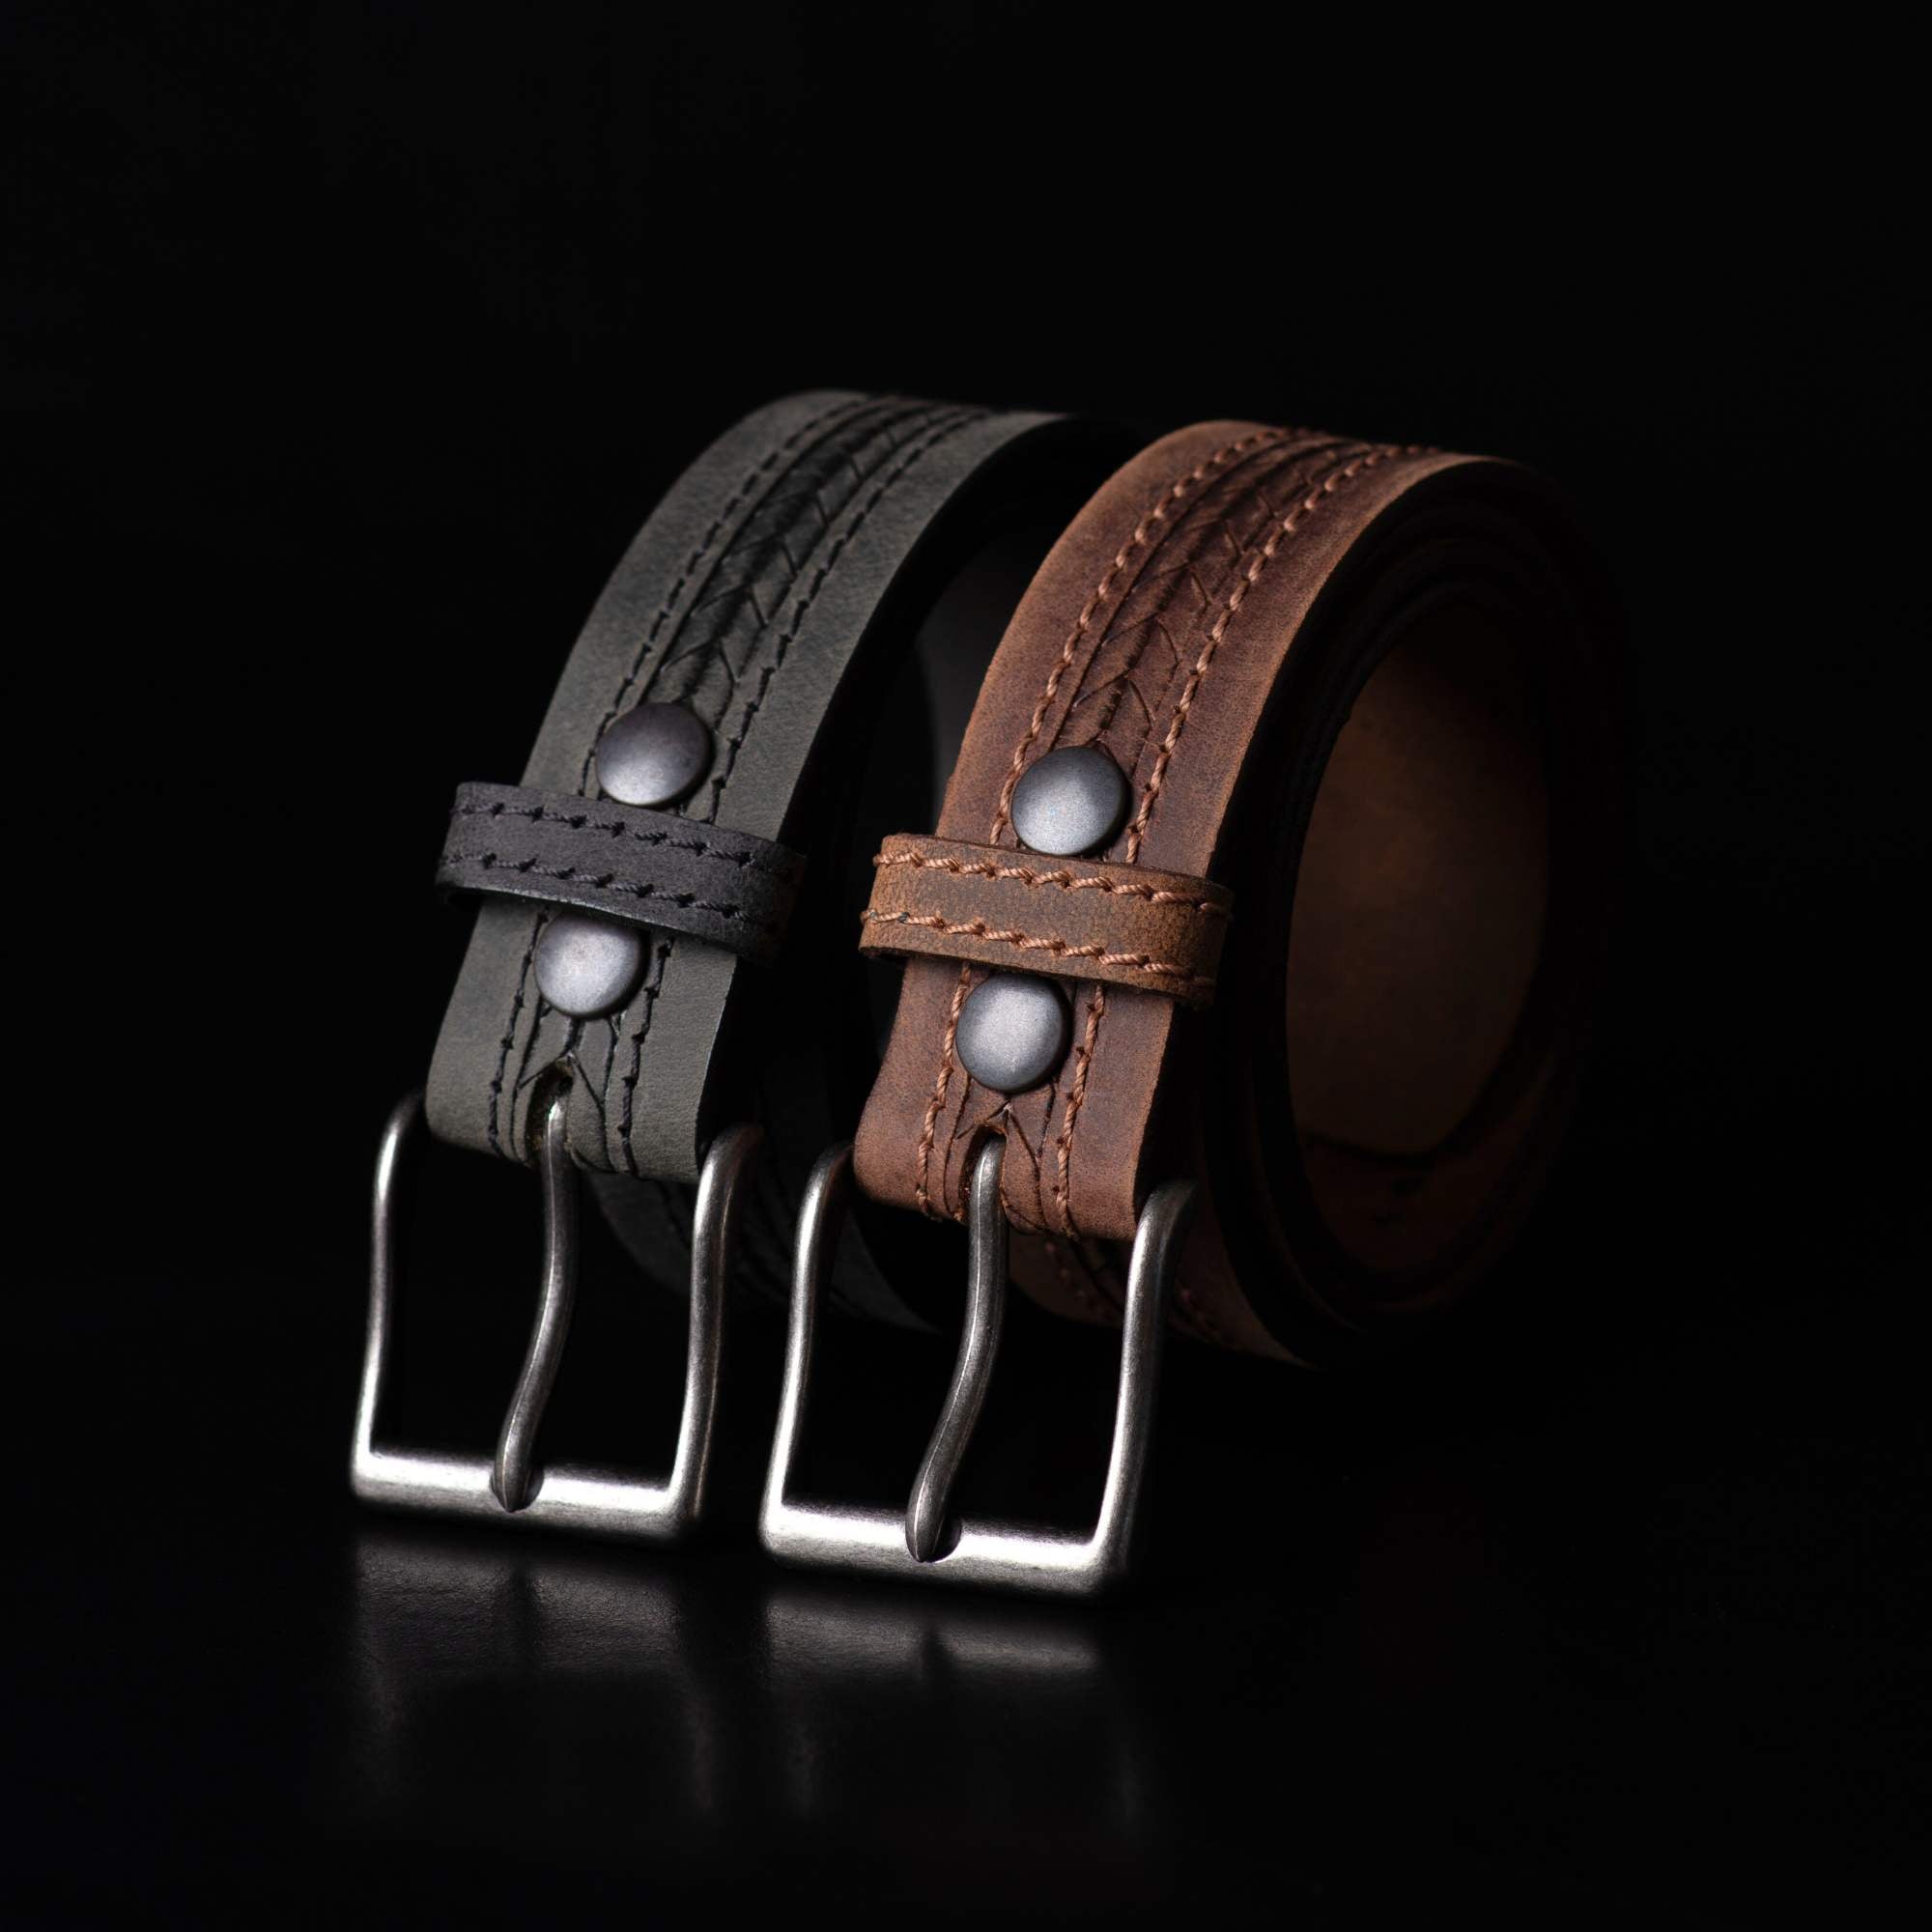 The Double Hole Belts - 2 PC Gift Set